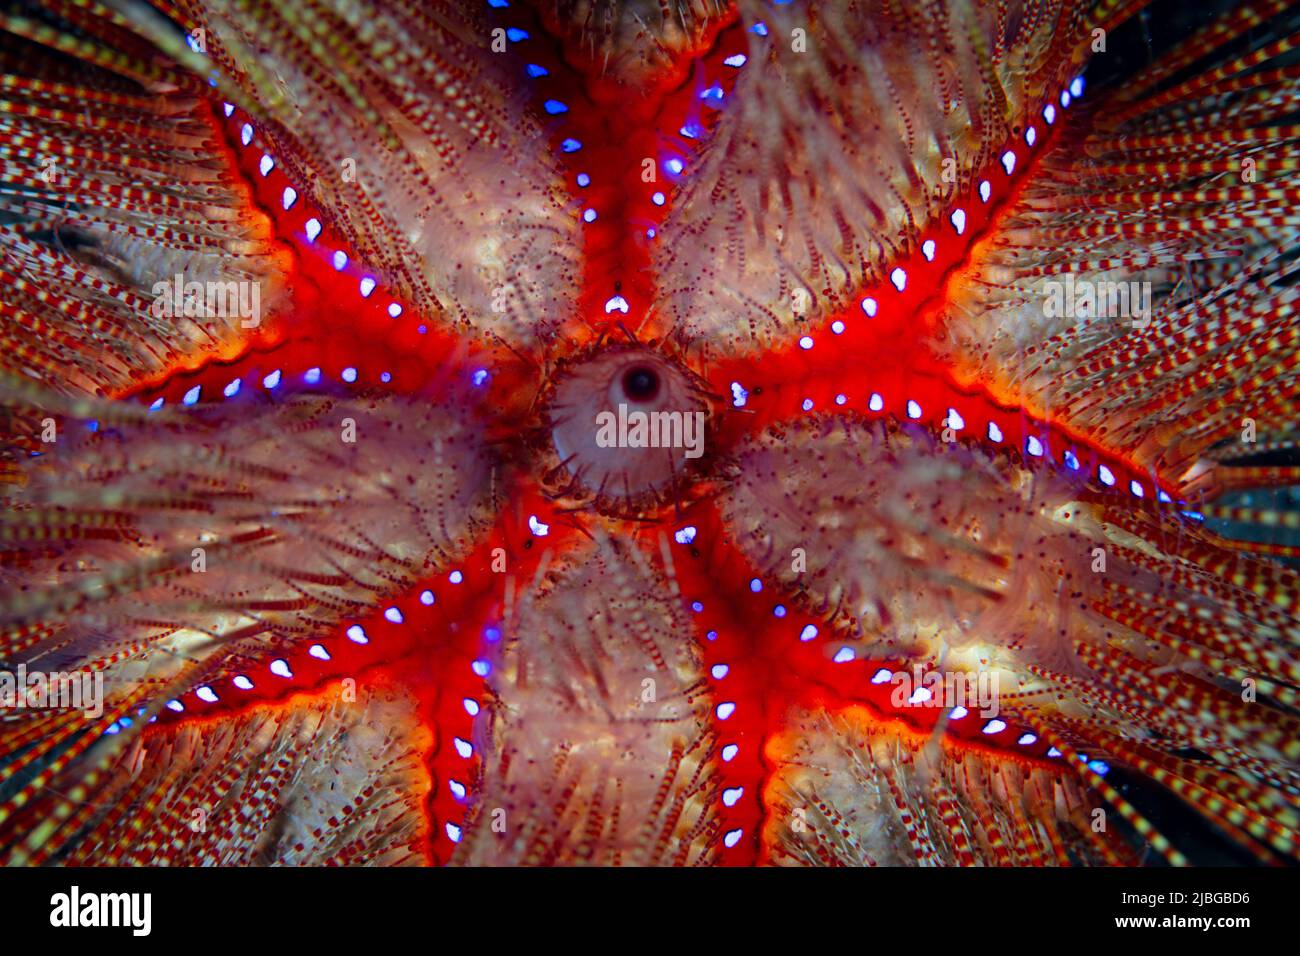 Detail of a Fire urchin, Astropyga radiata, on the seafloor of Lembeh Strait, Indonesia. This species has venomous spines to defend itself. Stock Photo